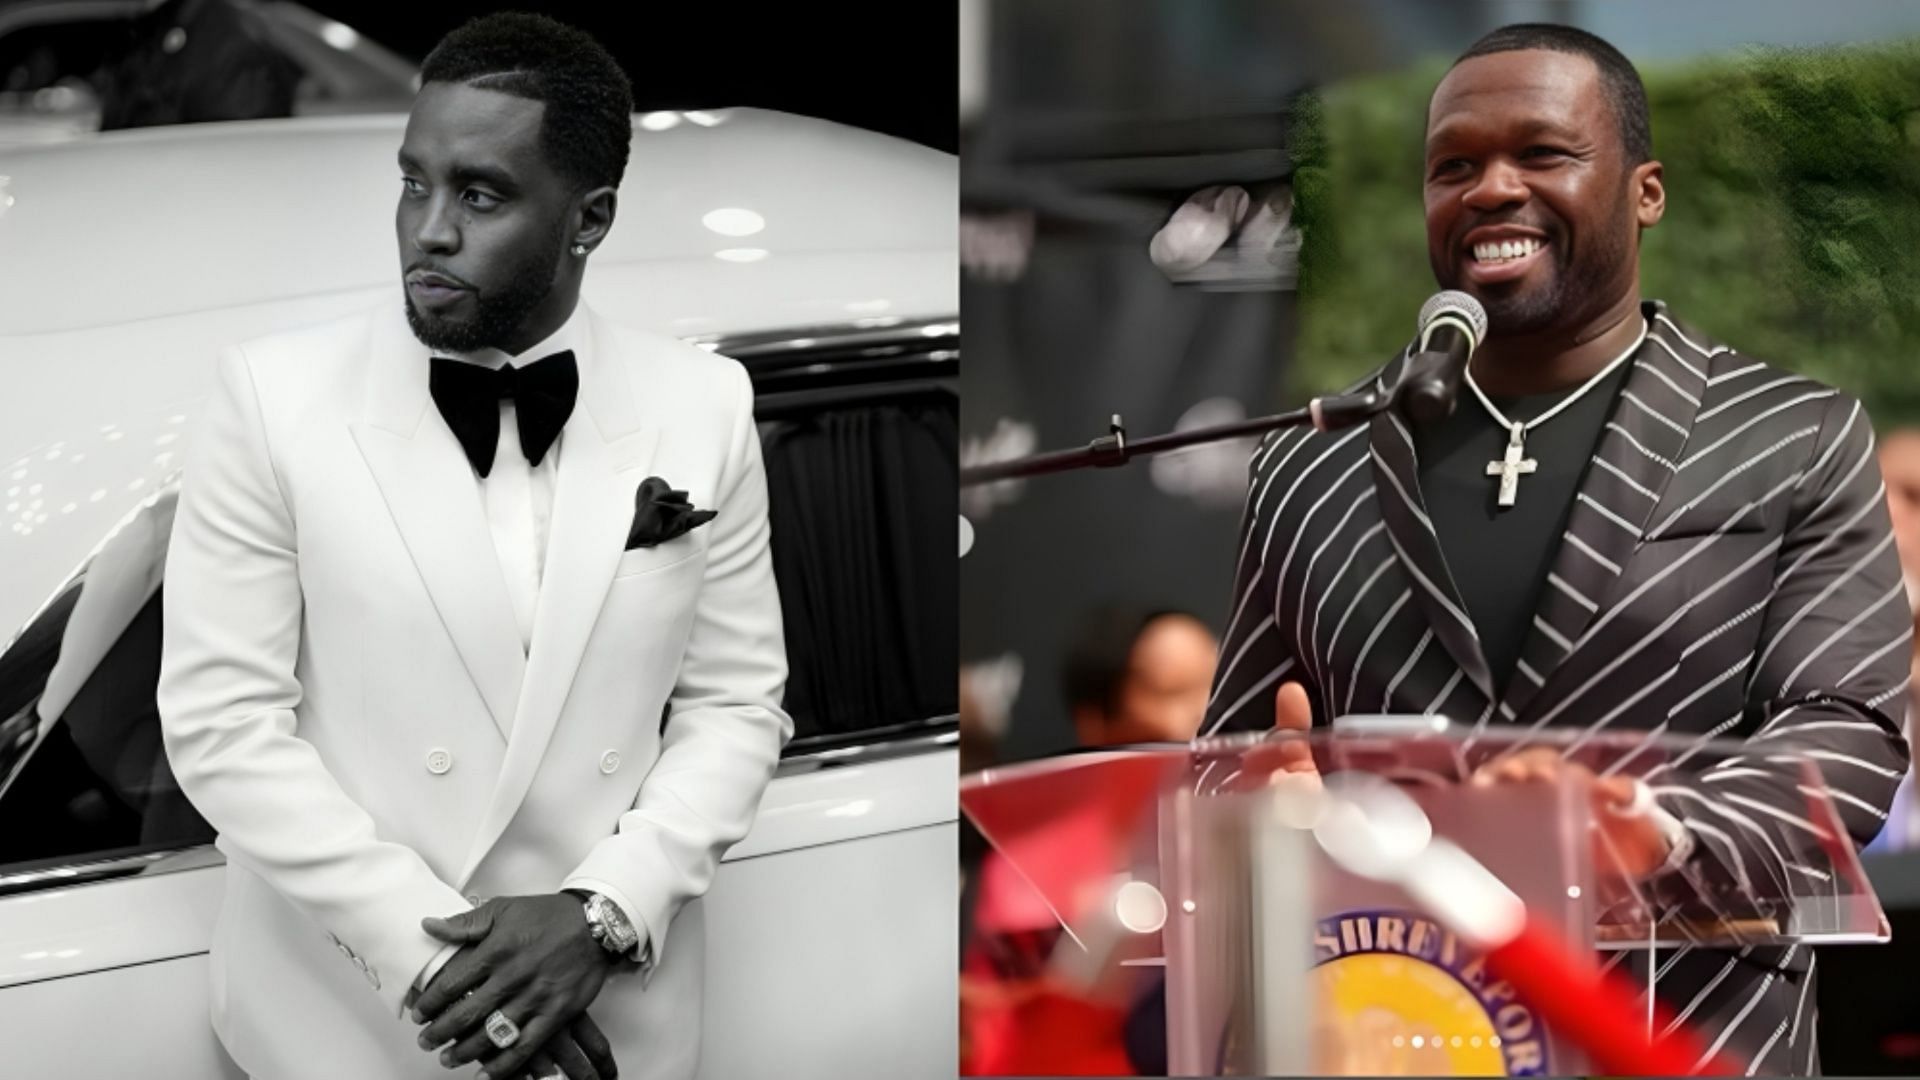 50 Cent criticized Diddy for the video (Image via Facebook/@Diddy, Instagram /@50cent)